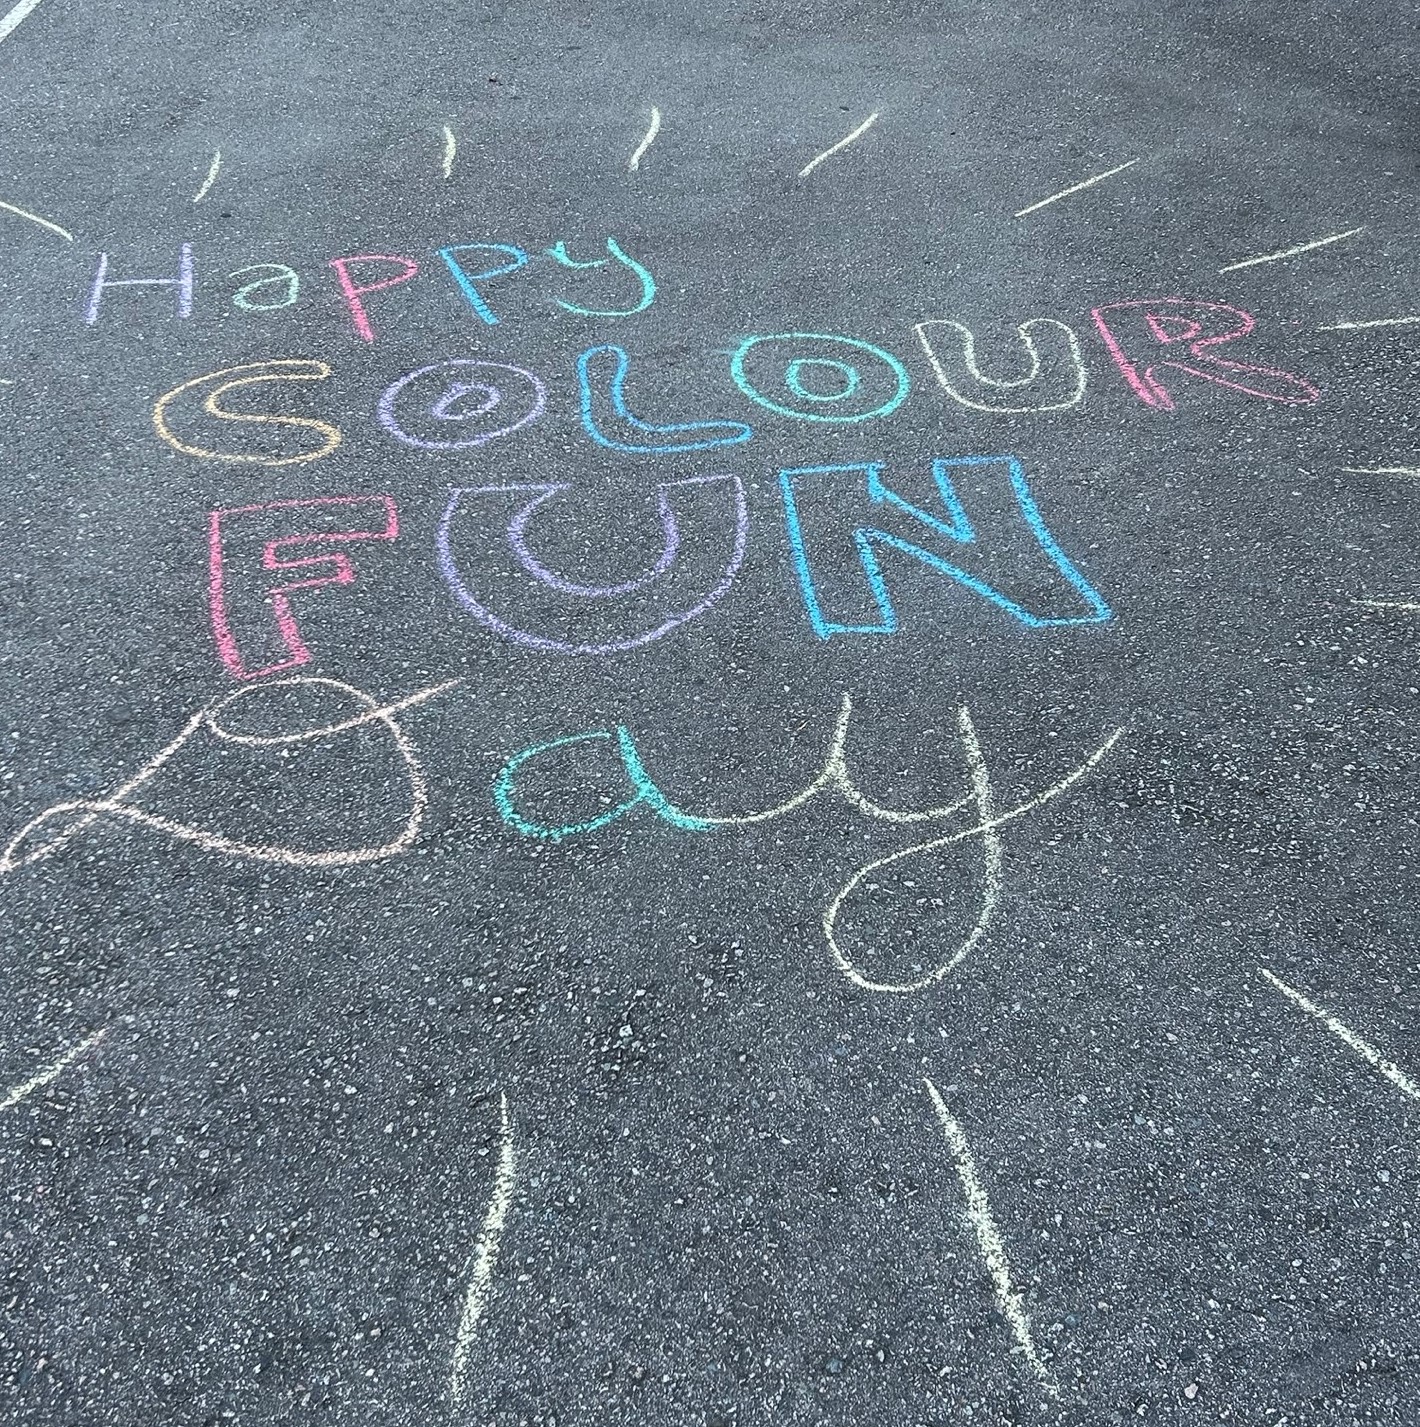 Happy Colour Fun Day is written in mulitcolour chalk on pavement.